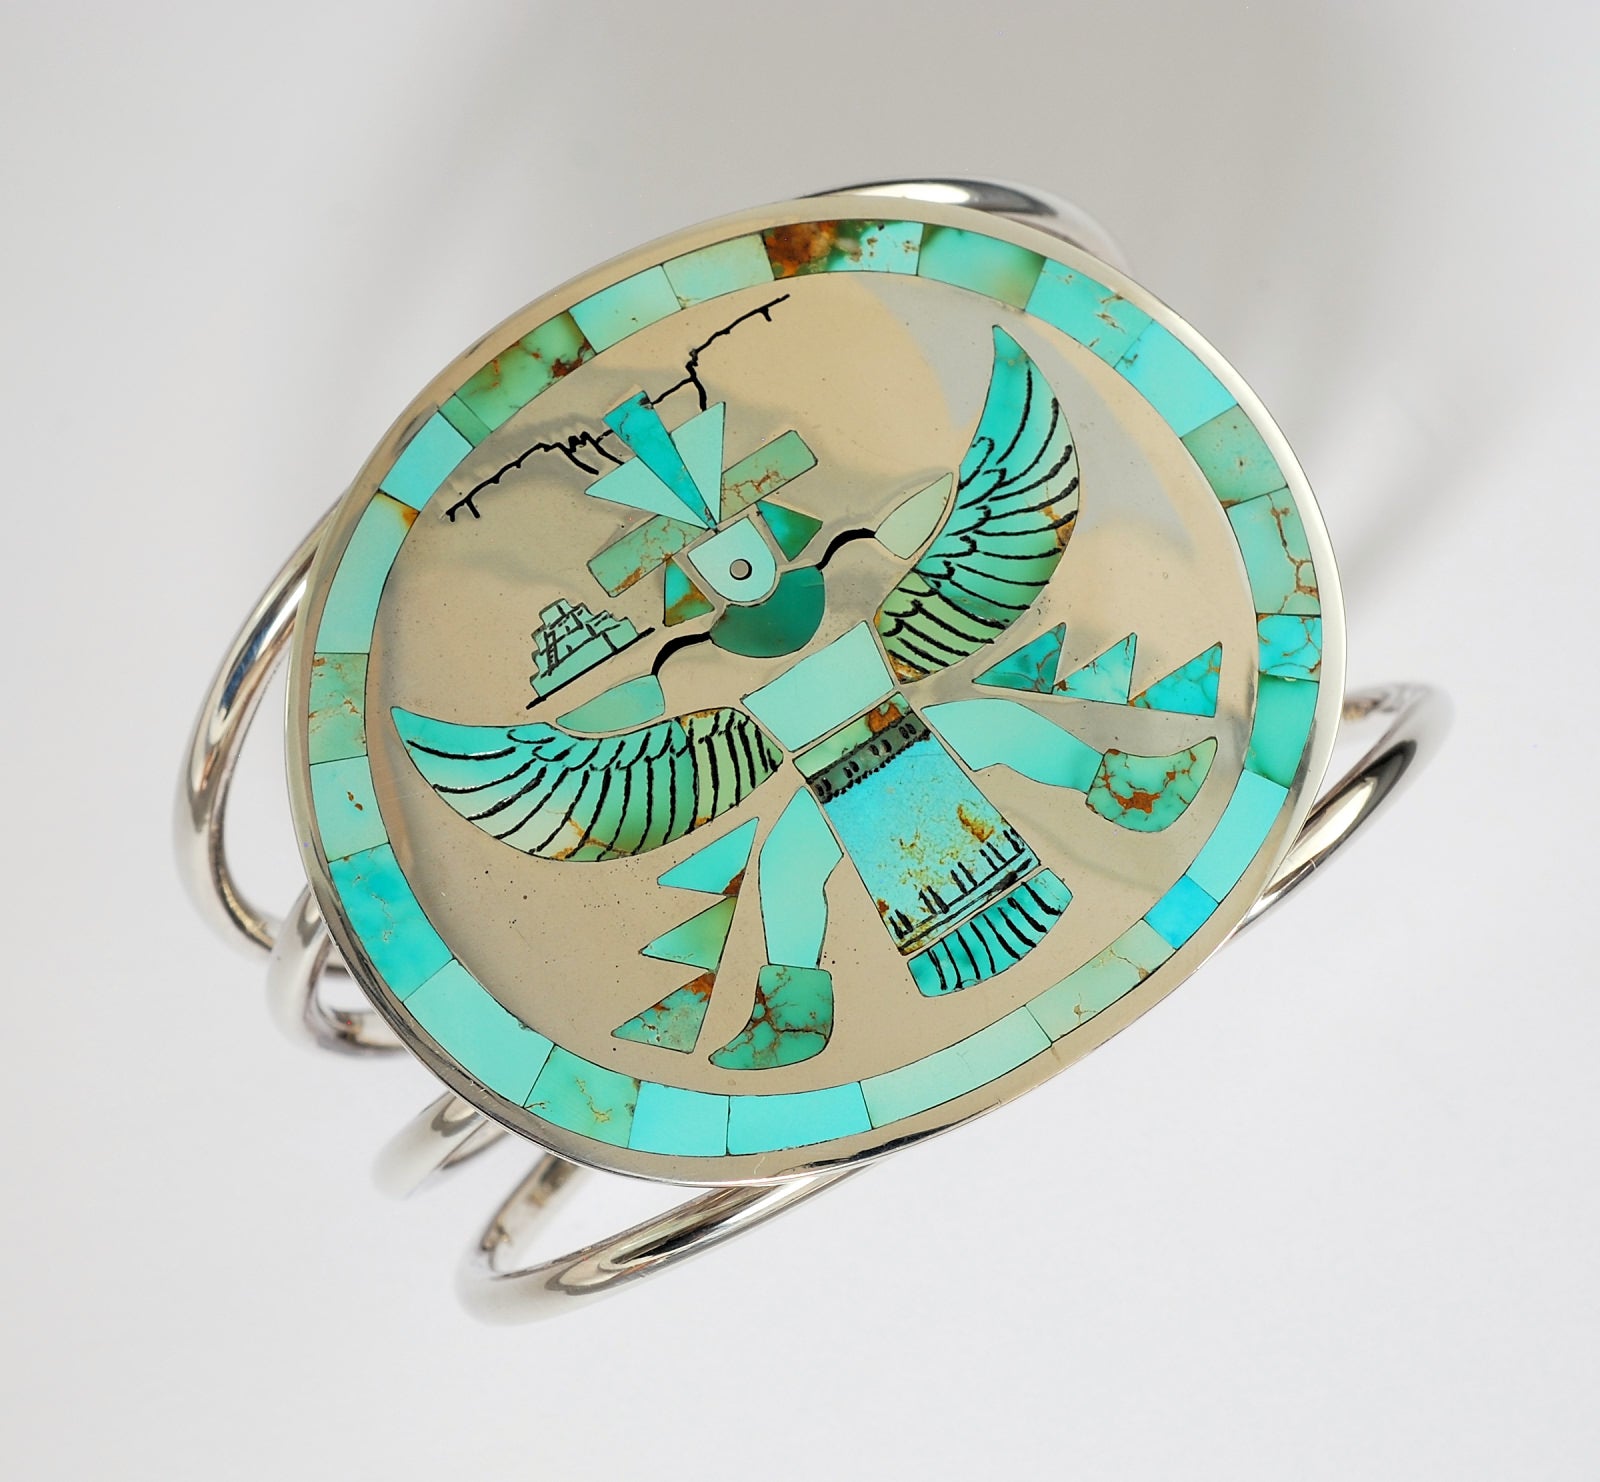 Zuni "Knifewing" Inlay Bracelet by Harlan and Monica Coonsis